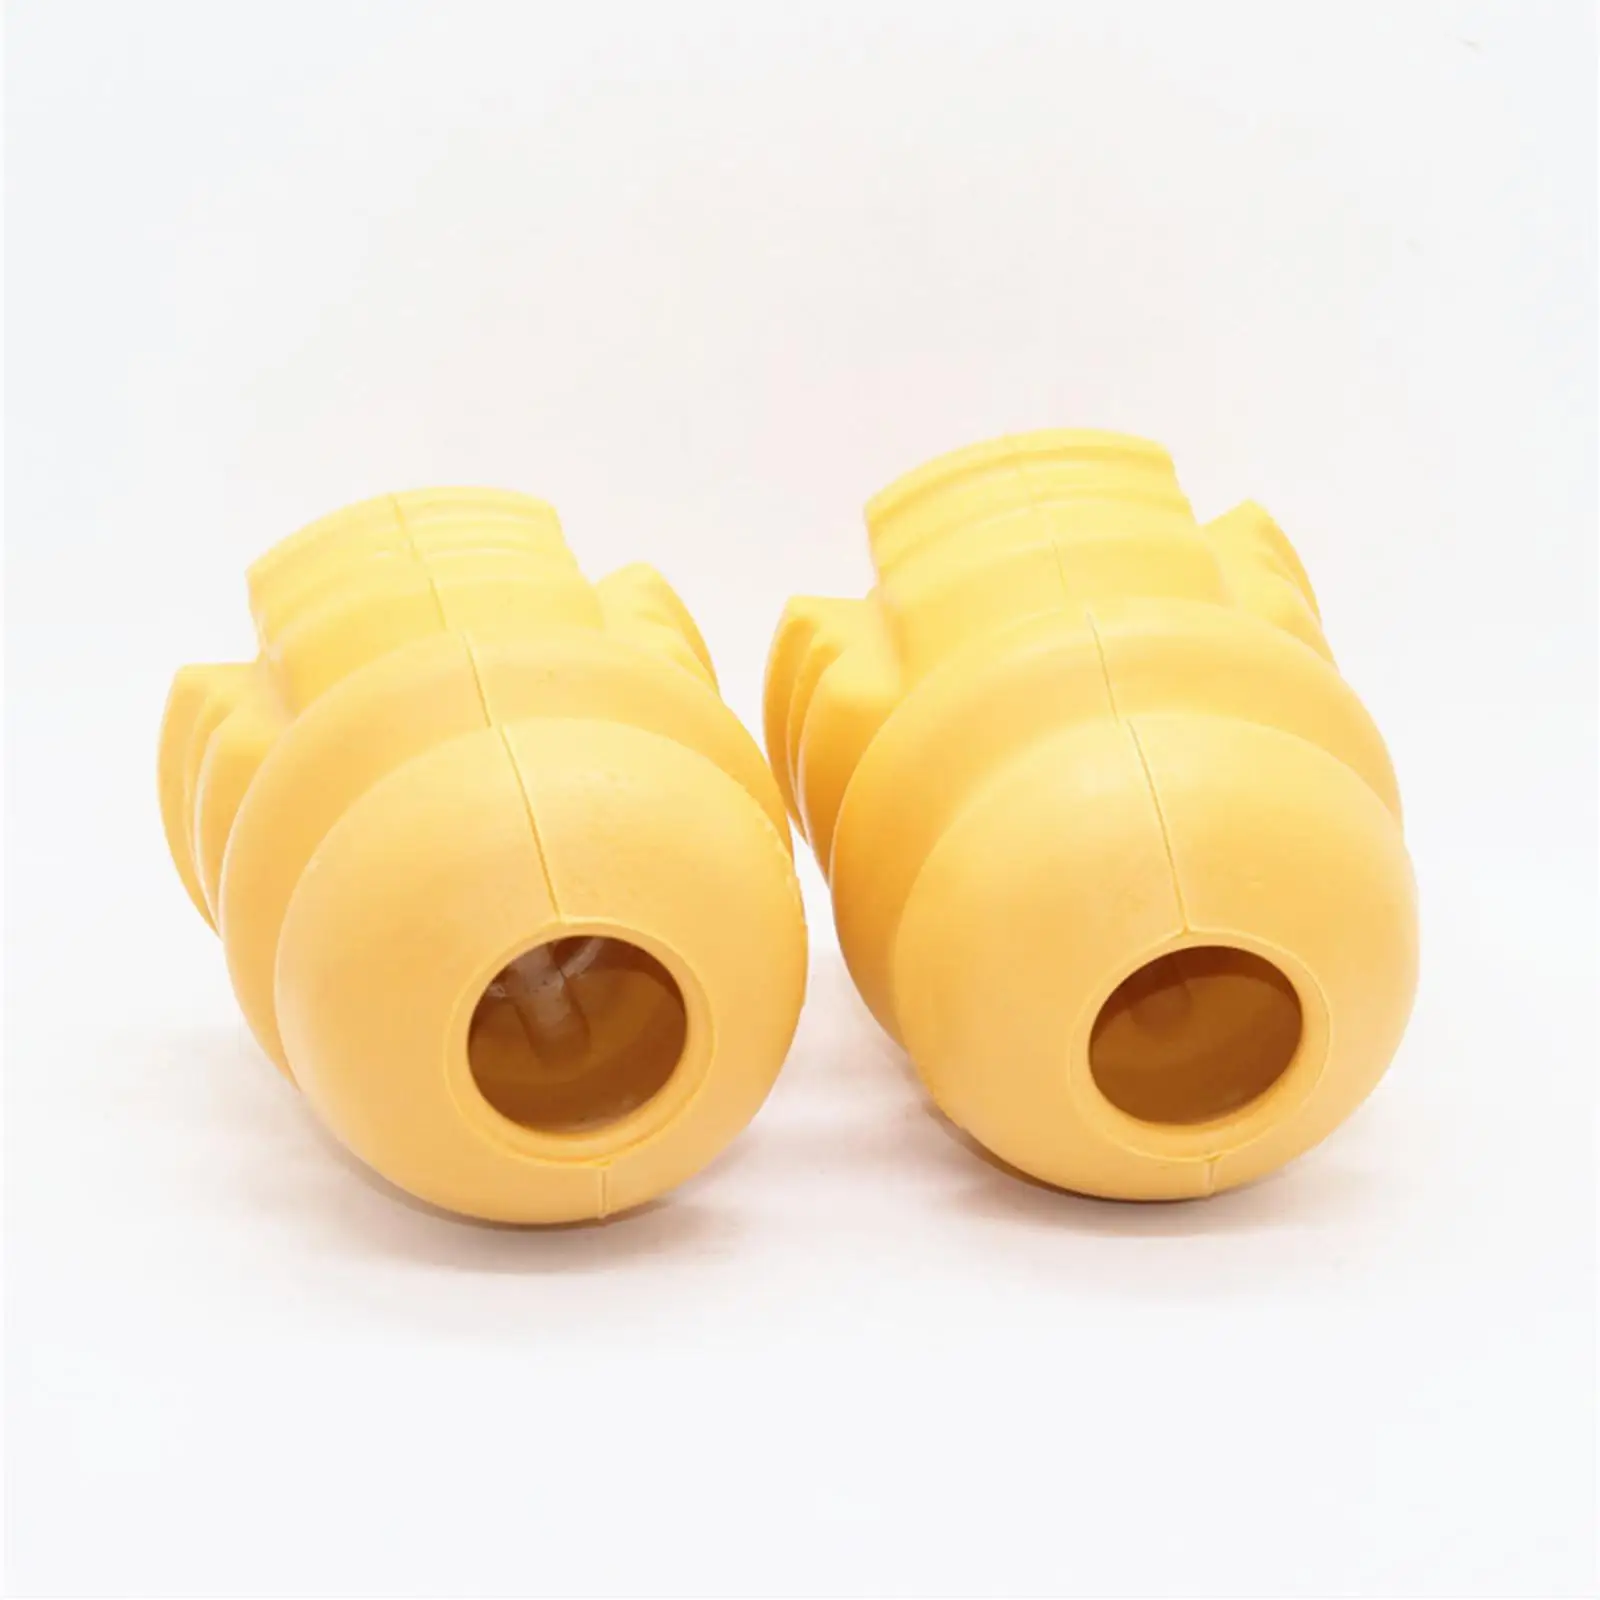 2x Rear Suspension Bump Stops Spare Parts for Kia Sorento 03-08 Easily to Install Professional Car Accessories